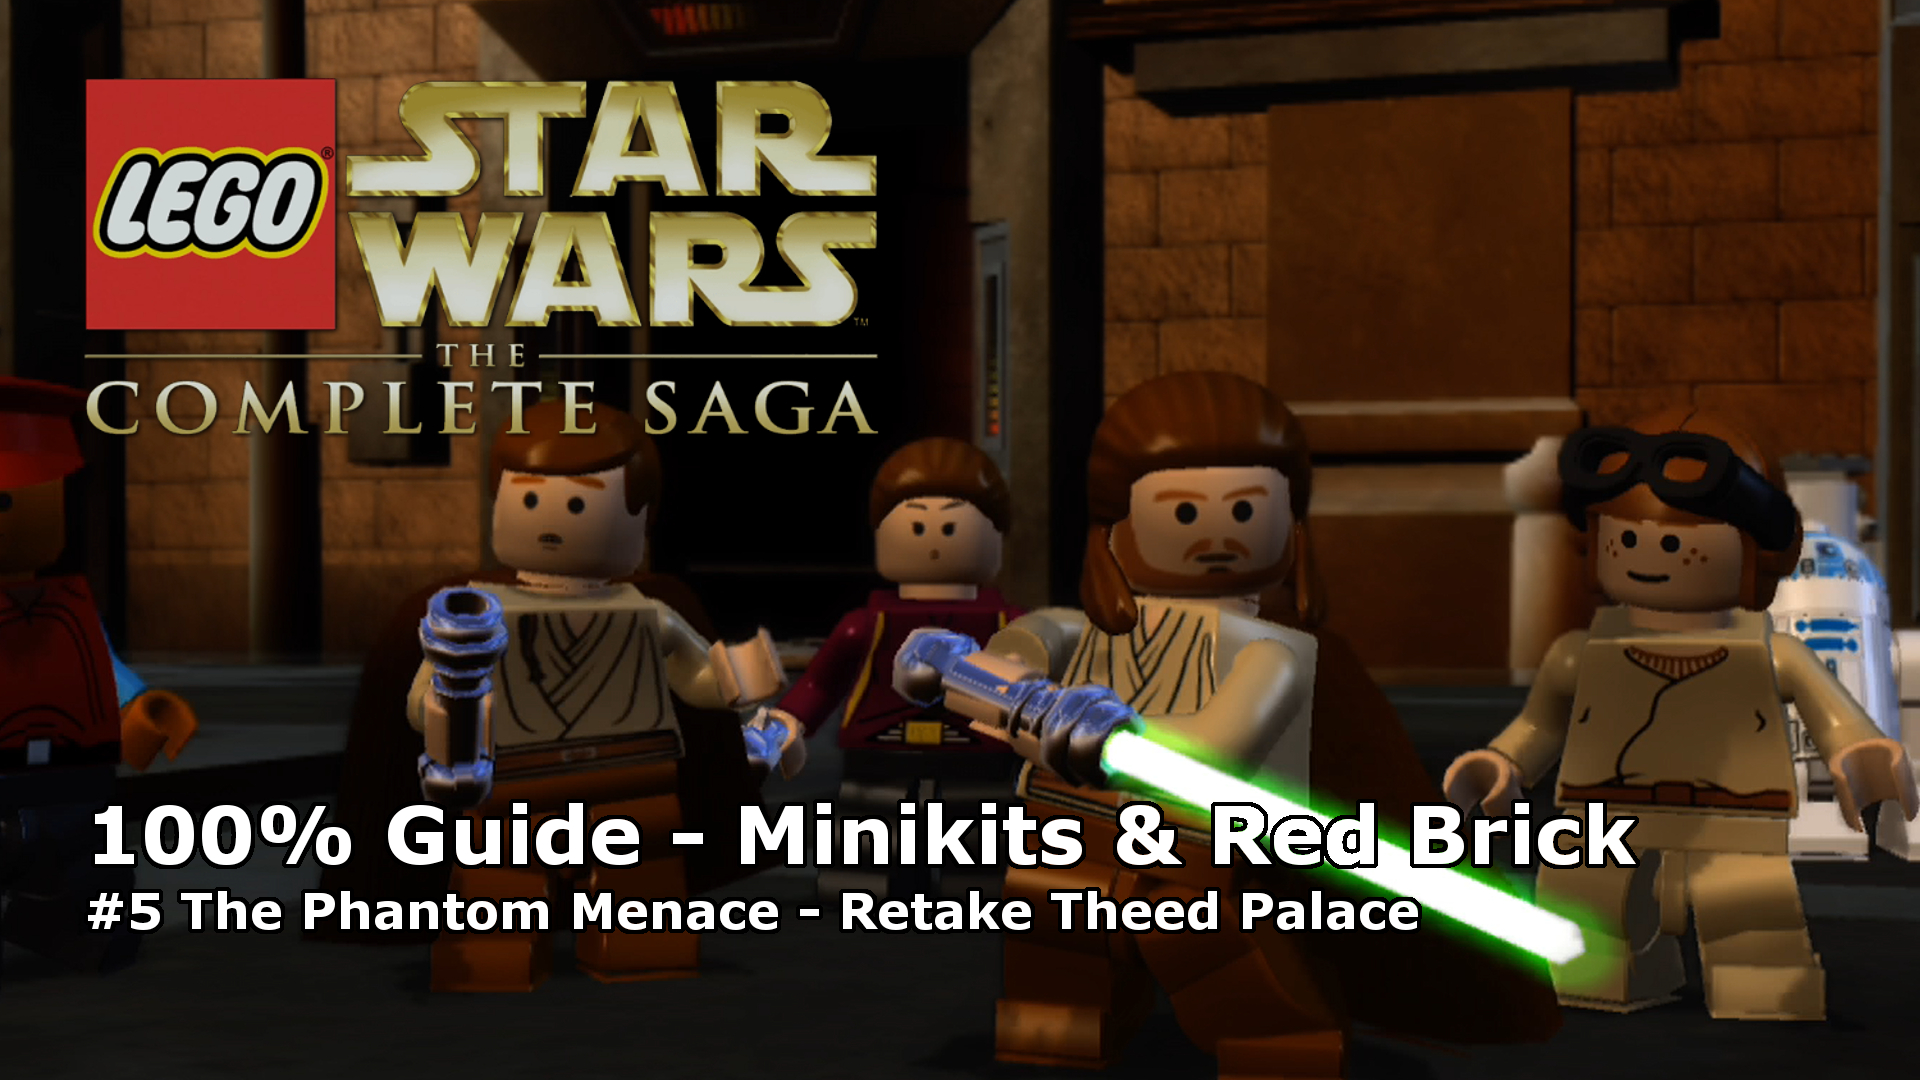 LEGO Star Wars: The Complete Saga - Theed Palace 100% Guide